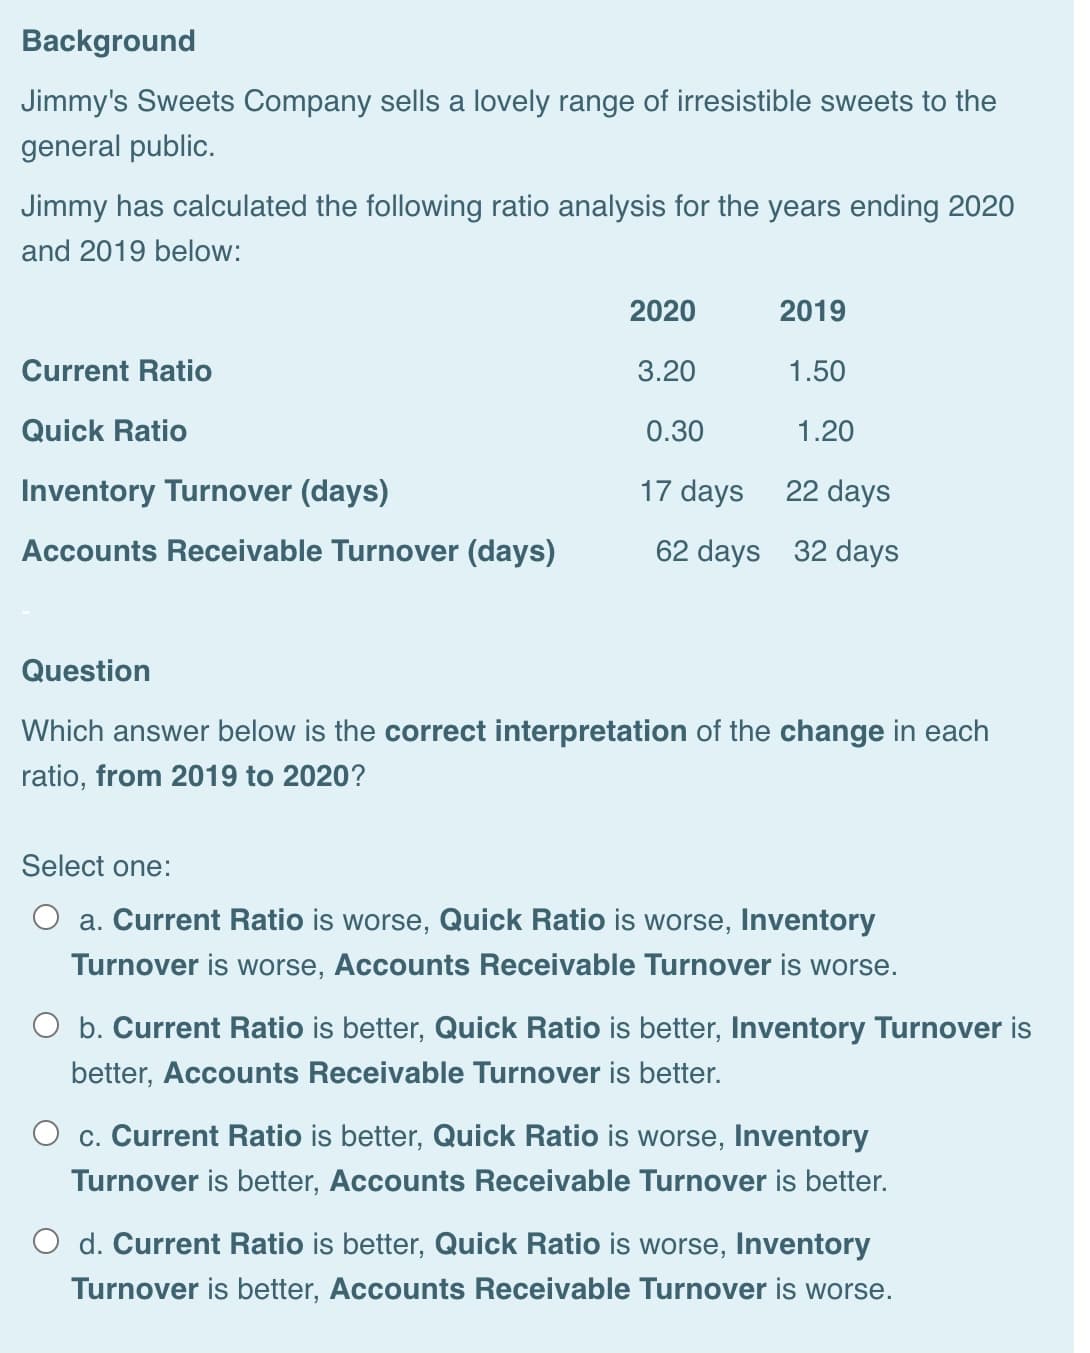 Background
Jimmy's Sweets Company sells a lovely range of irresistible sweets to the
general public.
Jimmy has calculated the following ratio analysis for the years ending 2020
and 2019 below:
2020
2019
Current Ratio
3.20
1.50
Quick Ratio
0.30
1.20
Inventory Turnover (days)
17 days
22 days
Accounts Receivable Turnover (days)
62 days 32 days
Question
Which answer below is the correct interpretation of the change in each
ratio, from 2019 to 2020?
Select one:
O a. Current Ratio is worse, Quick Ratio is worse, Inventory
Turnover is worse, Accounts Receivable Turnover is worse.
O b. Current Ratio is better, Quick Ratio is better, Inventory Turnover is
better, Accounts Receivable Turnover is better.
O c. Current Ratio is better, Quick Ratio is worse, Inventory
Turnover is better, Accounts Receivable Turnover is better.
O d. Current Ratio is better, Quick Ratio is worse, Inventory
Turnover is better, Accounts Receivable Turnover is worse.
